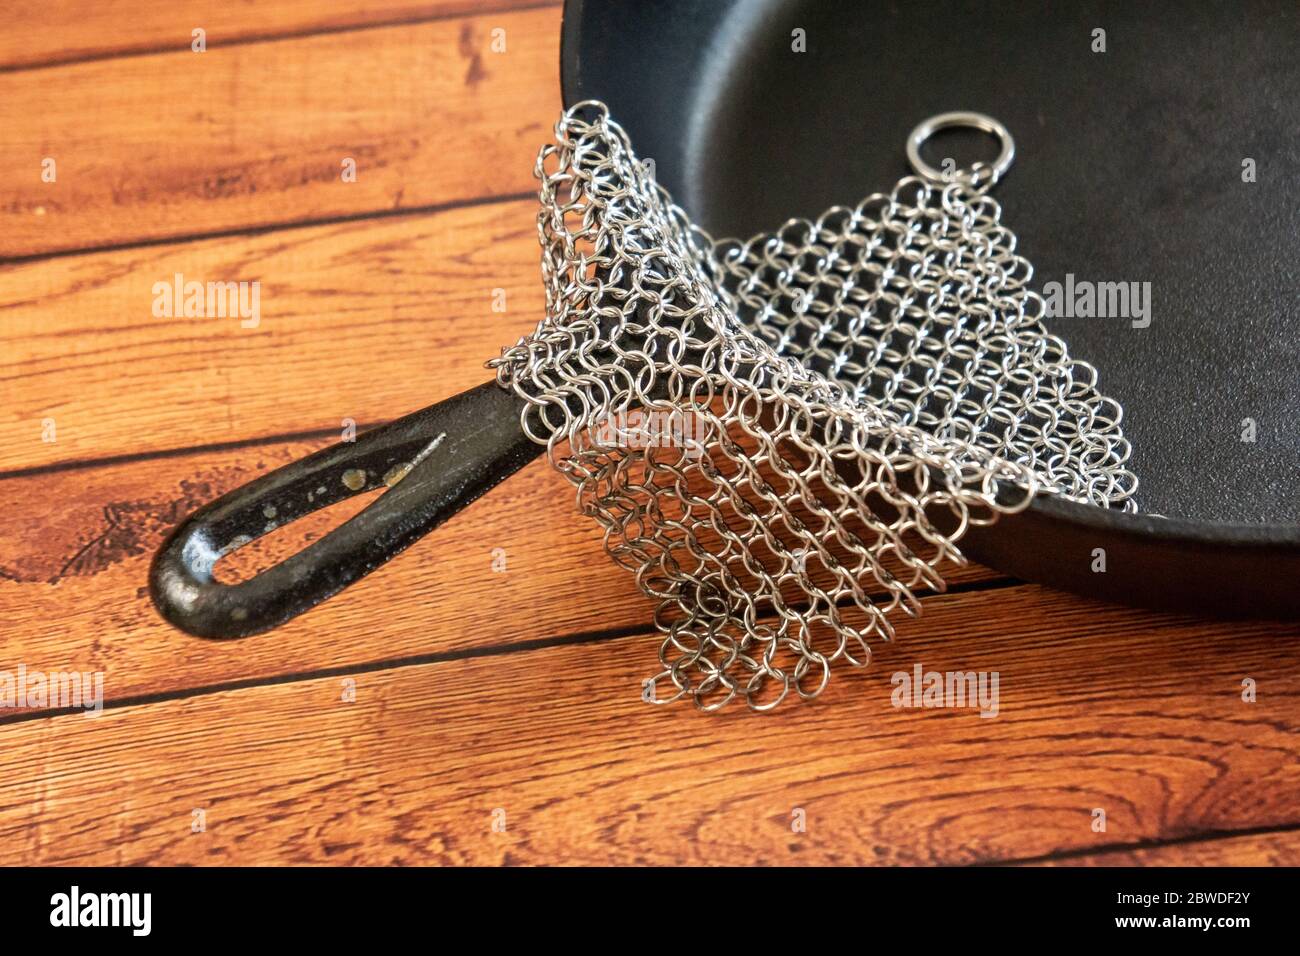 https://c8.alamy.com/comp/2BWDF2Y/small-ring-chainmail-scrubber-for-cast-iron-stainless-steel-hard-anodized-cookware-and-other-pots-pans-for-for-cast-iron-cookware-dutch-ovens-2BWDF2Y.jpg